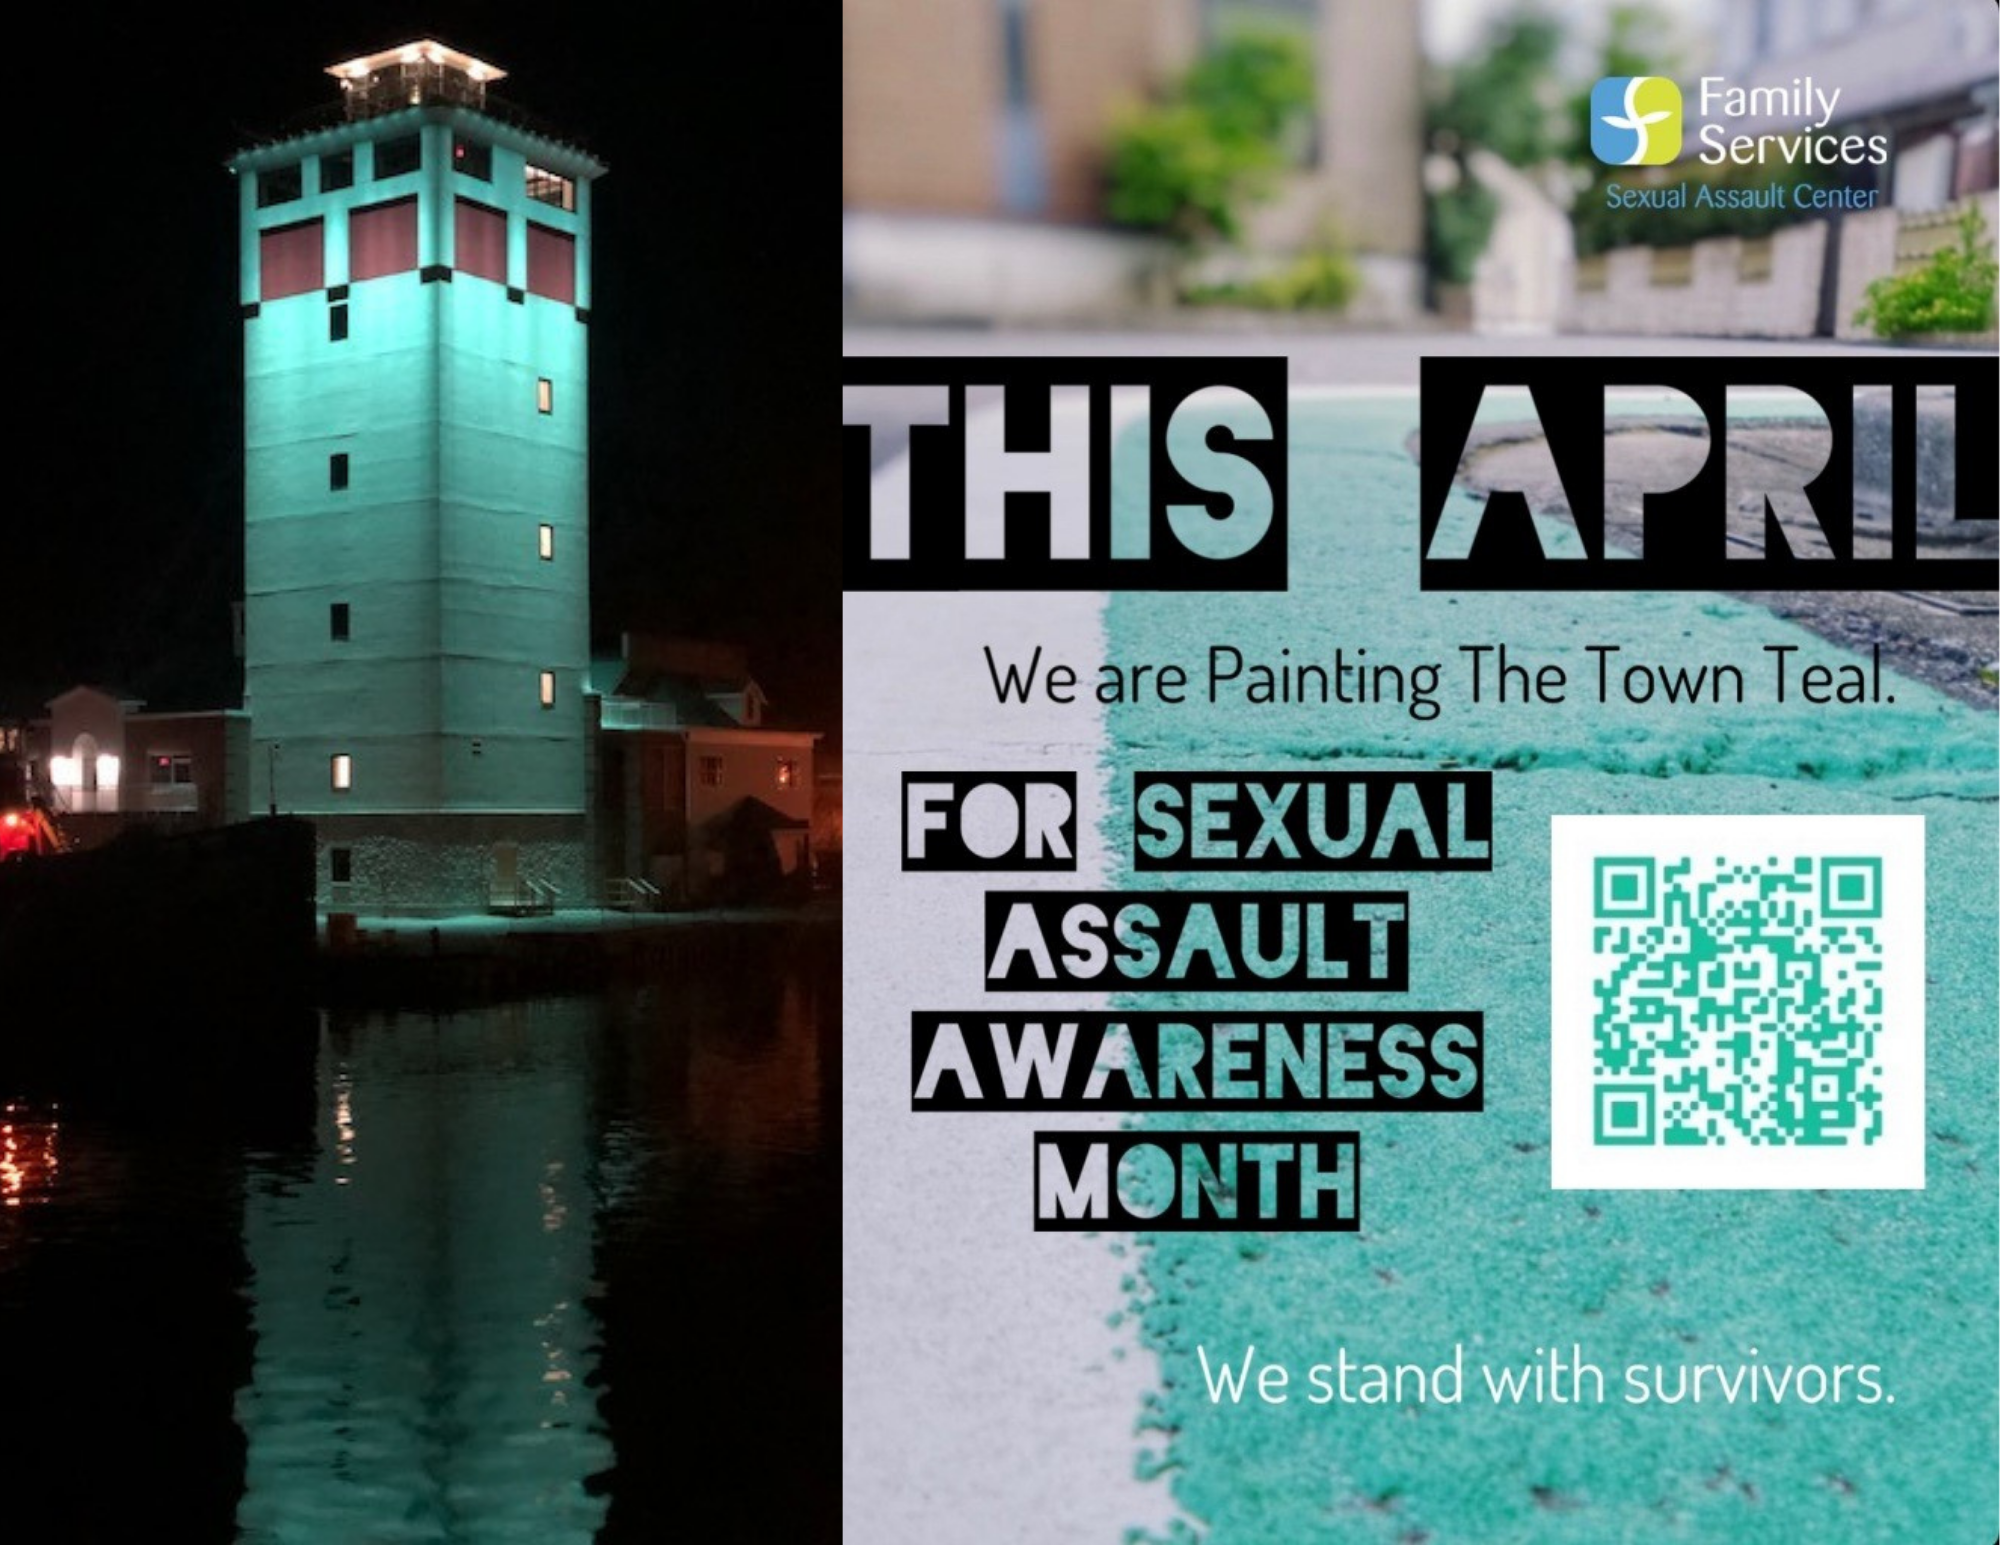 Paint the town teal for sexual assault awareness